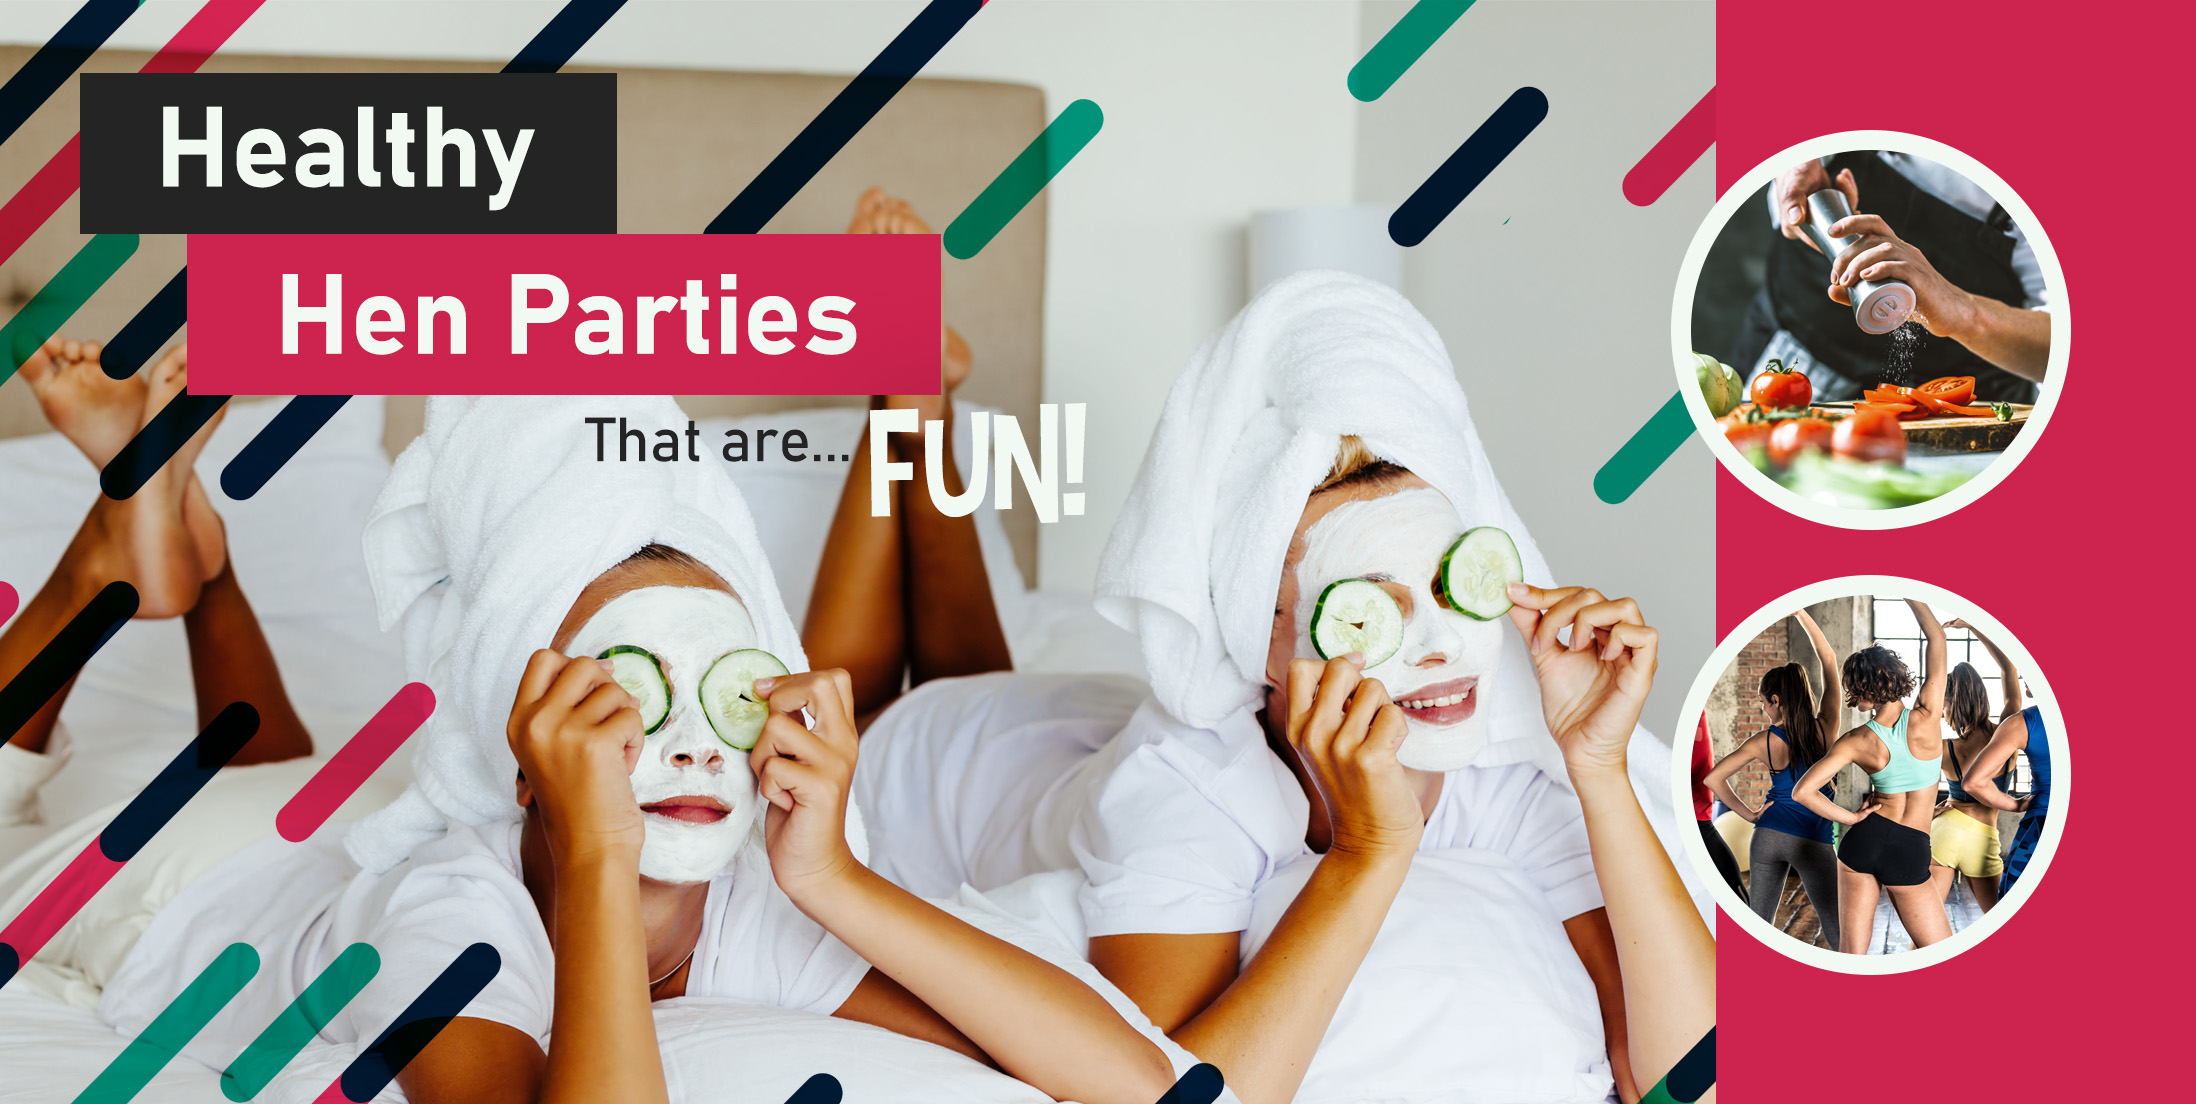 Healthy Hen Party Ideas That Are Fun!